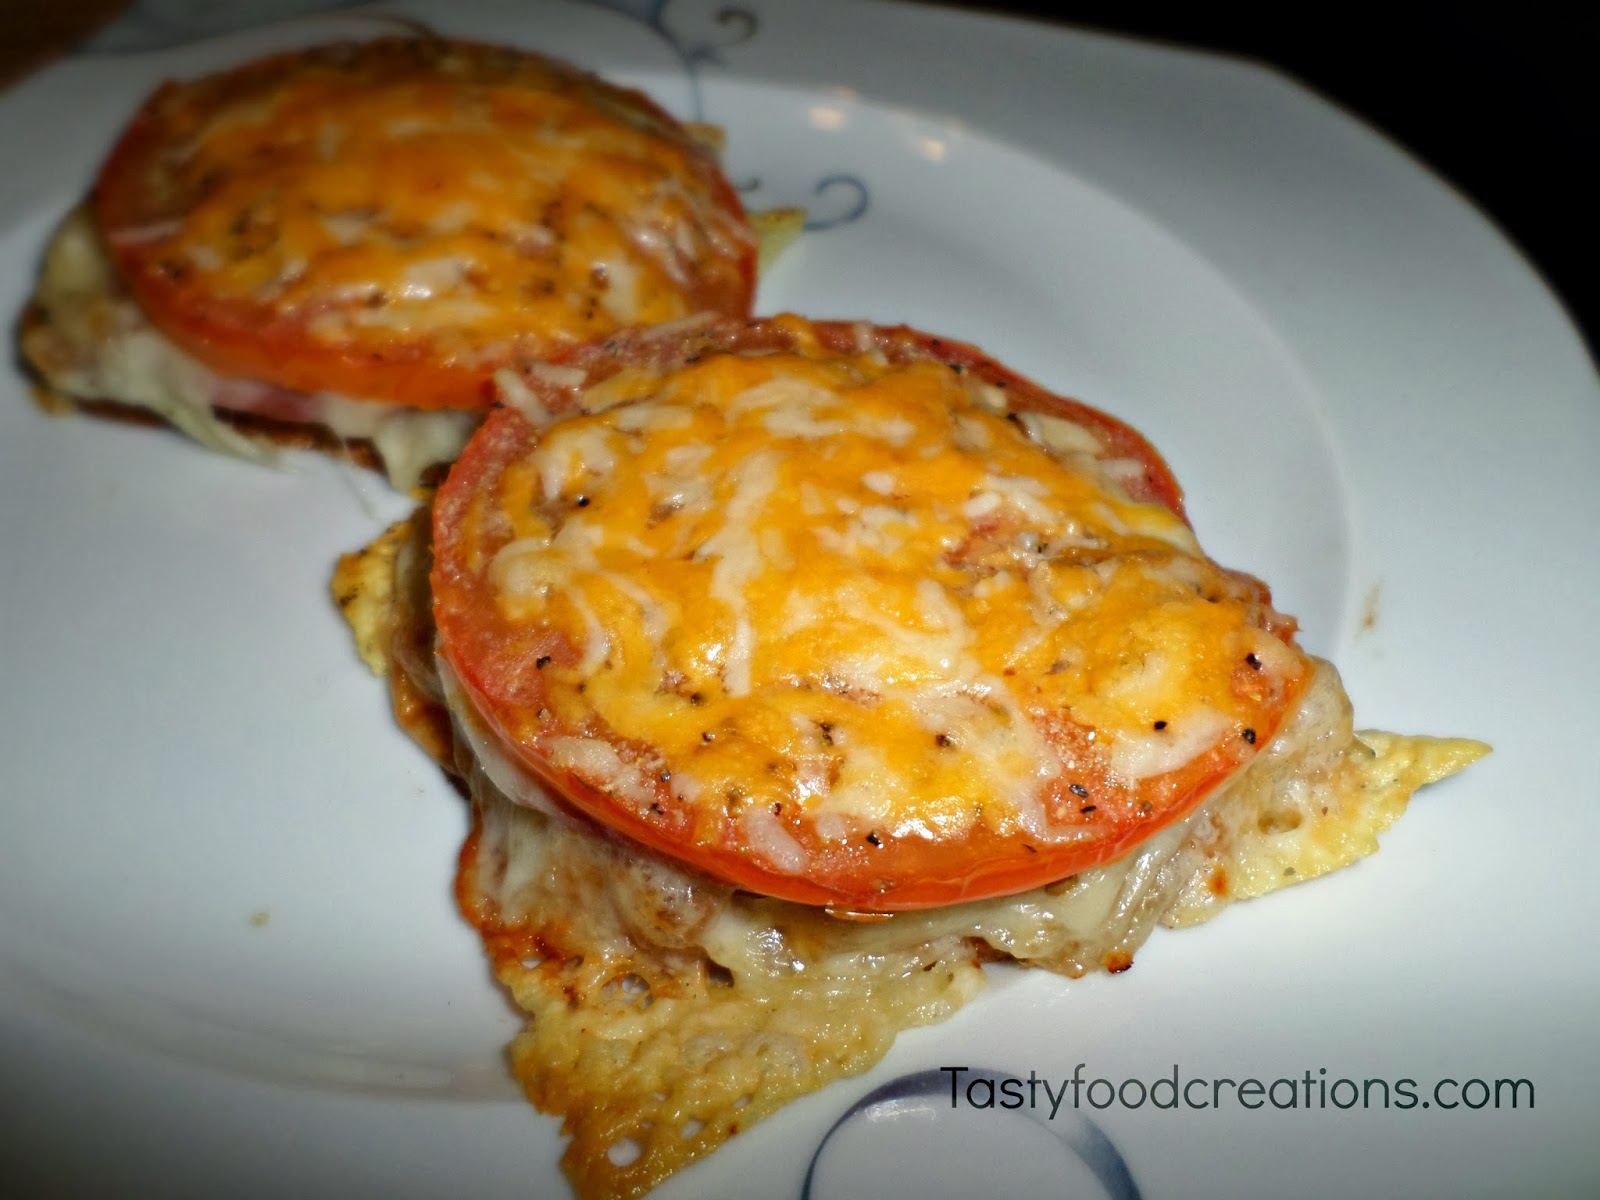 Tasty Food Creations: Baked Open Face Sandwich